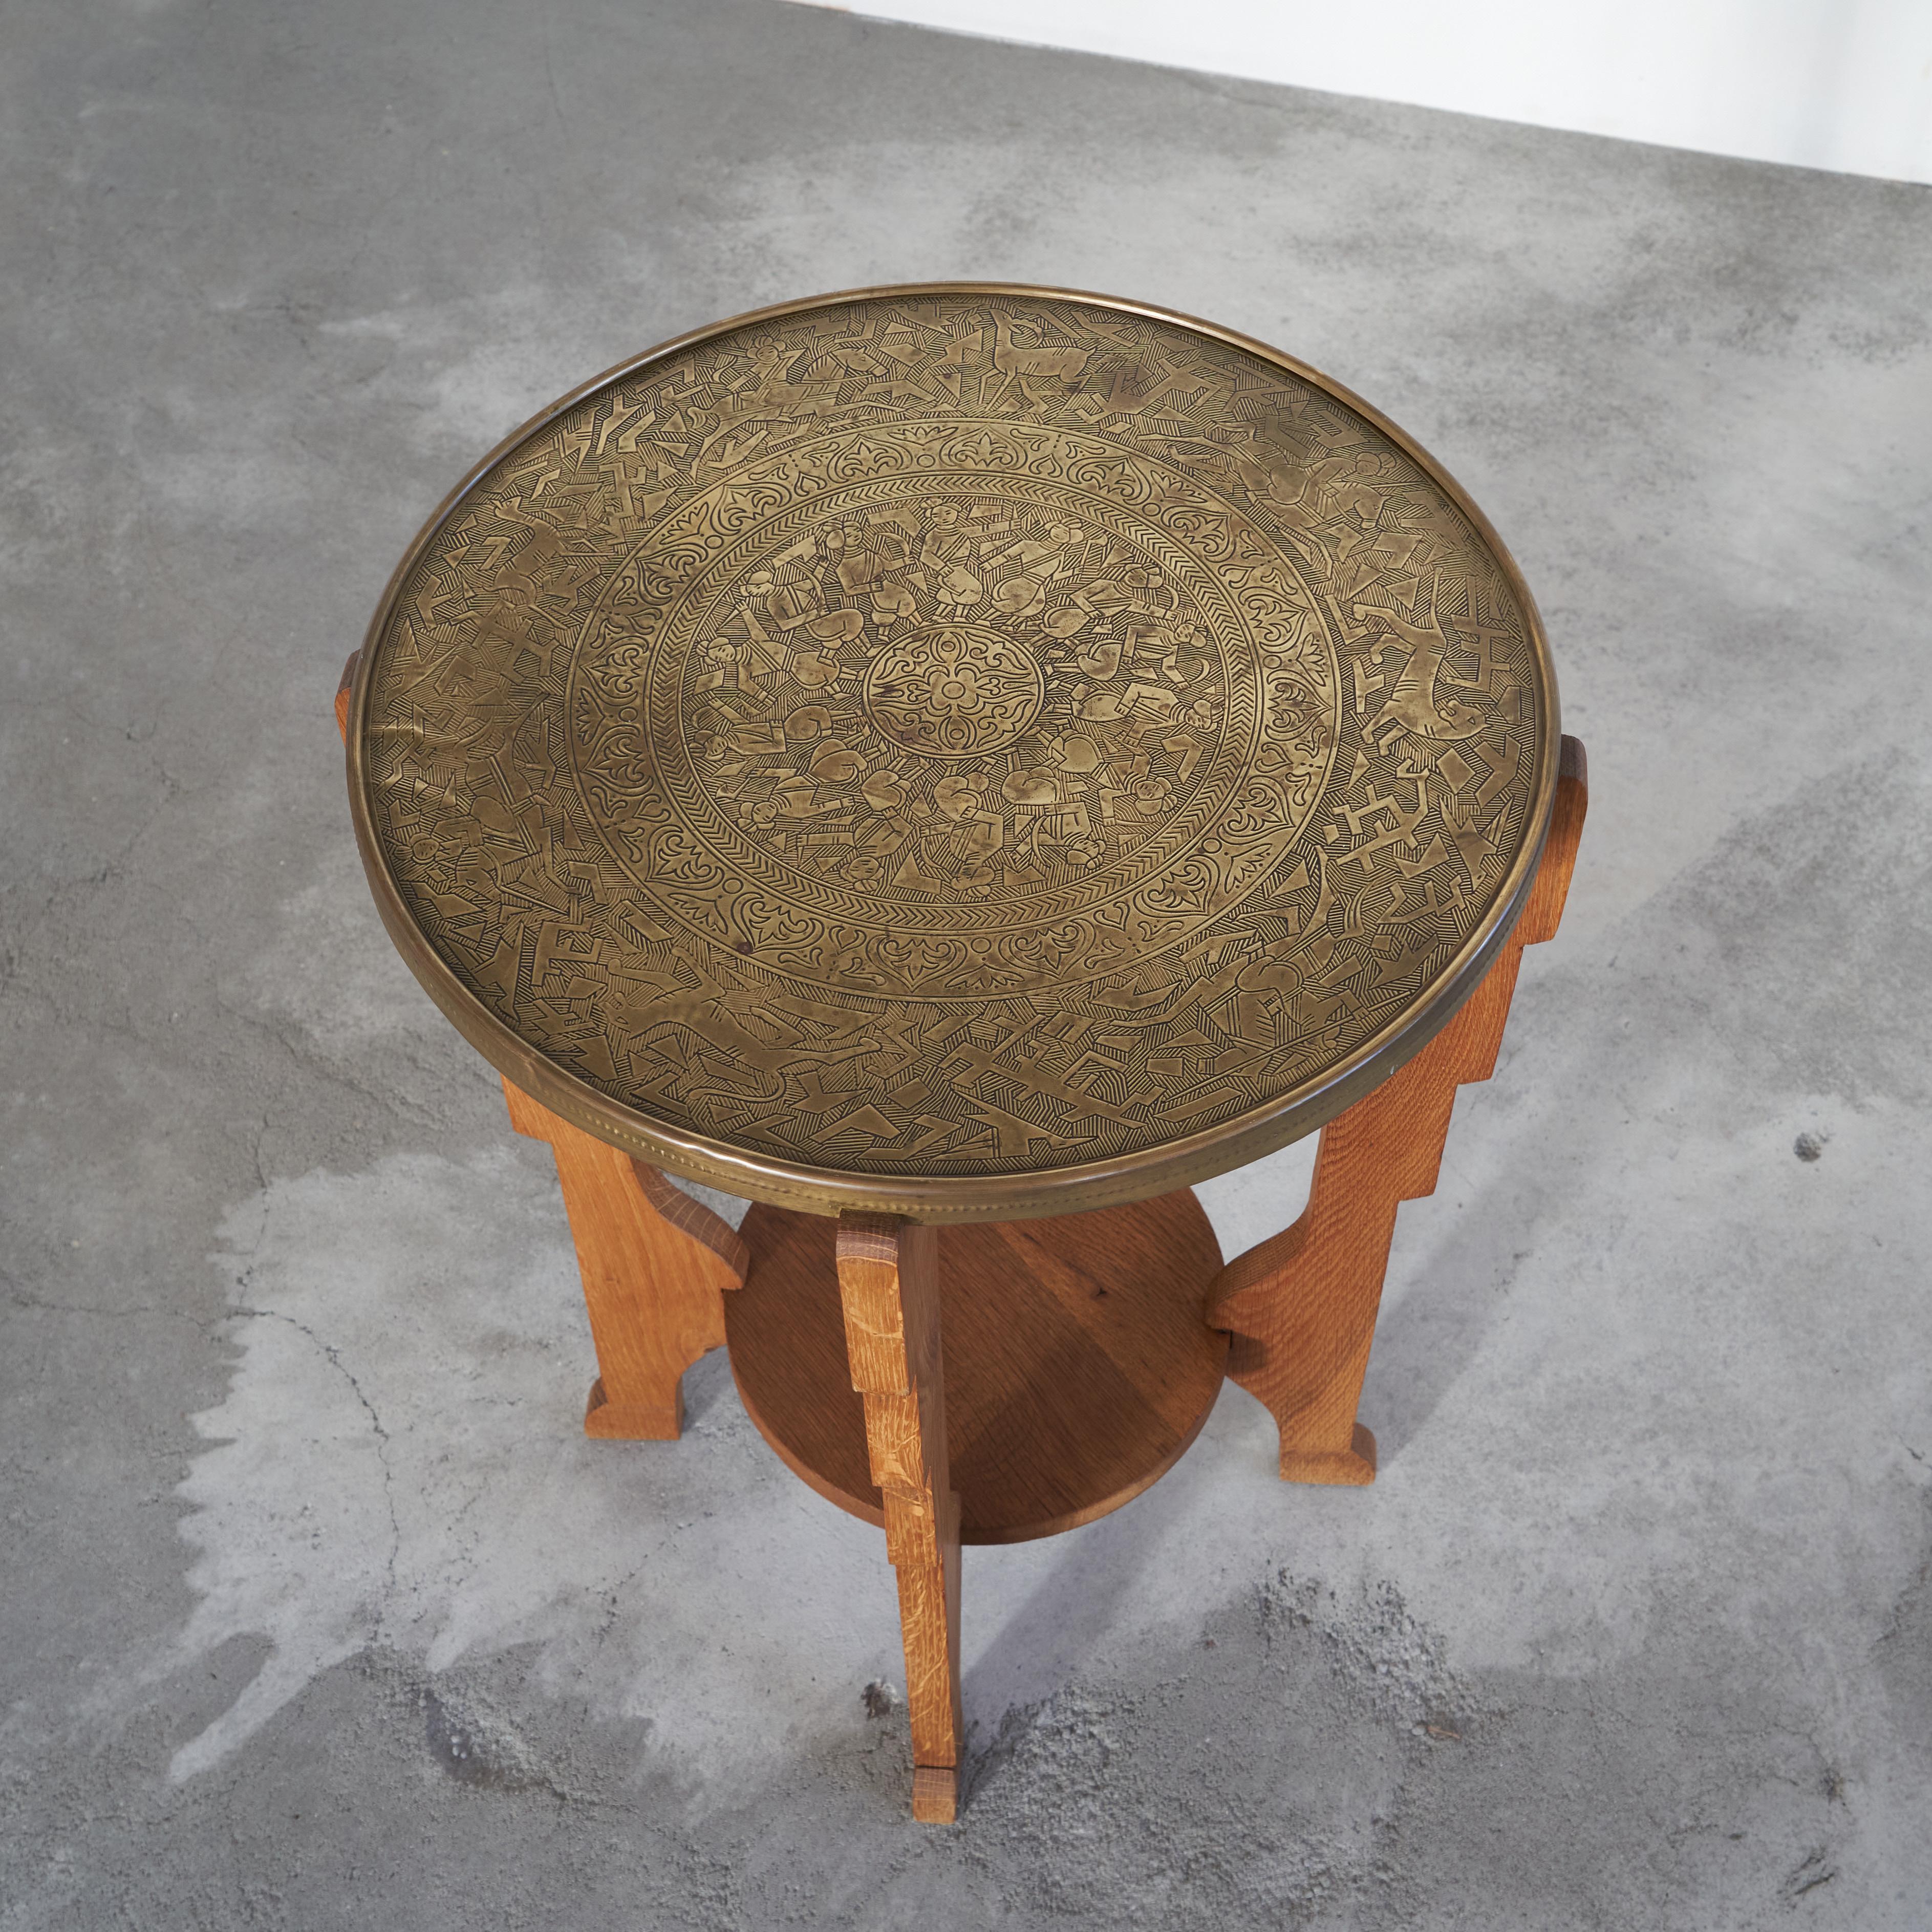 Hand-Crafted Art Deco Orientalist Gueridon Table with Embossed Brass Top 1930s For Sale